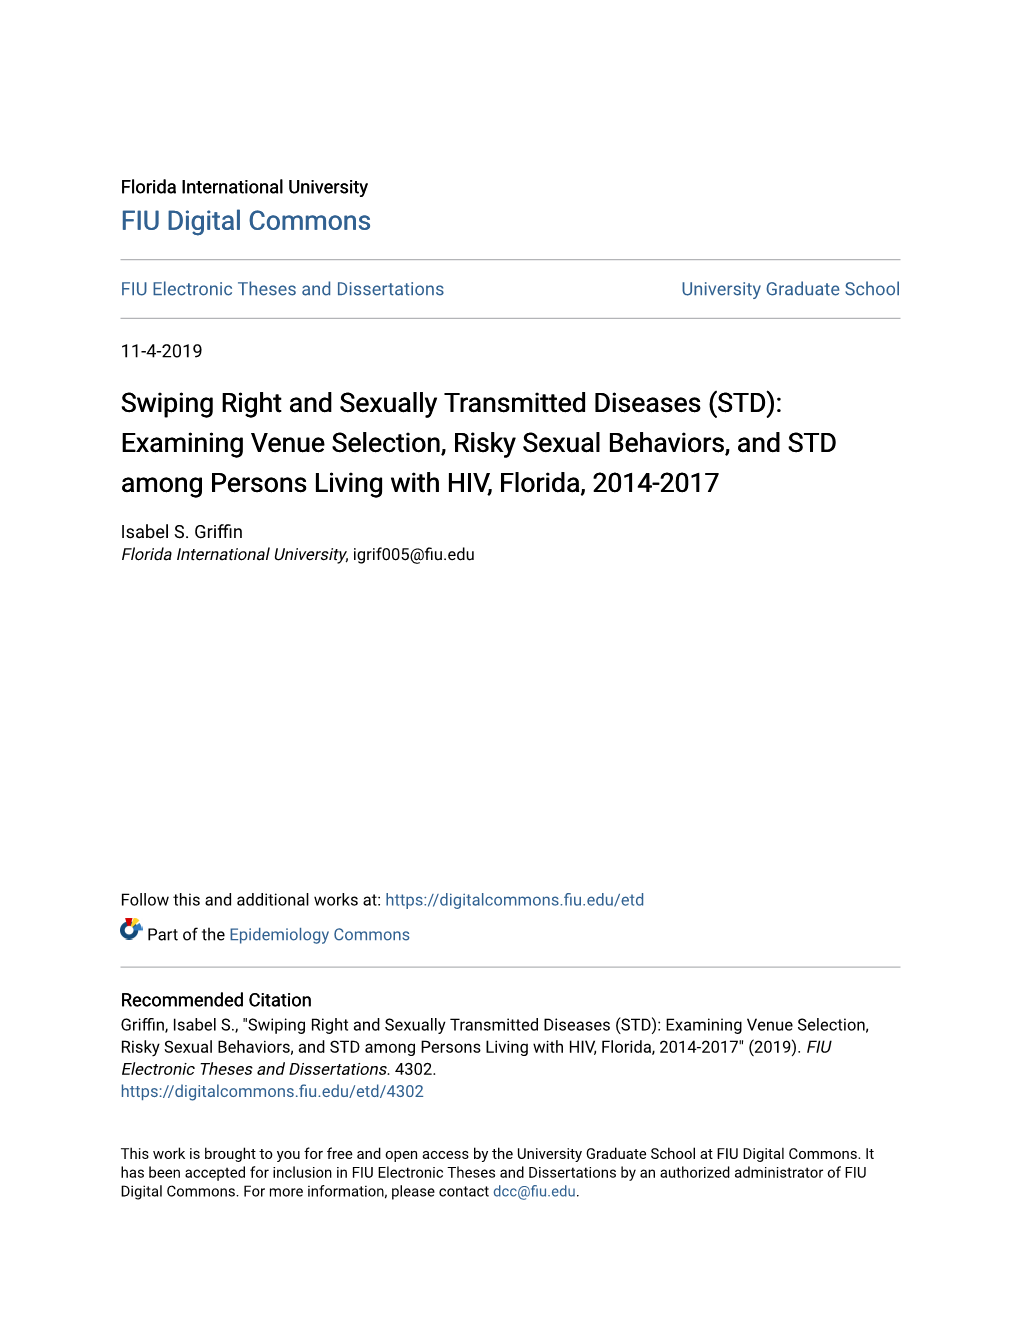 Swiping Right and Sexually Transmitted Diseases (STD): Examining Venue Selection, Risky Sexual Behaviors, and STD Among Persons Living with HIV, Florida, 2014-2017